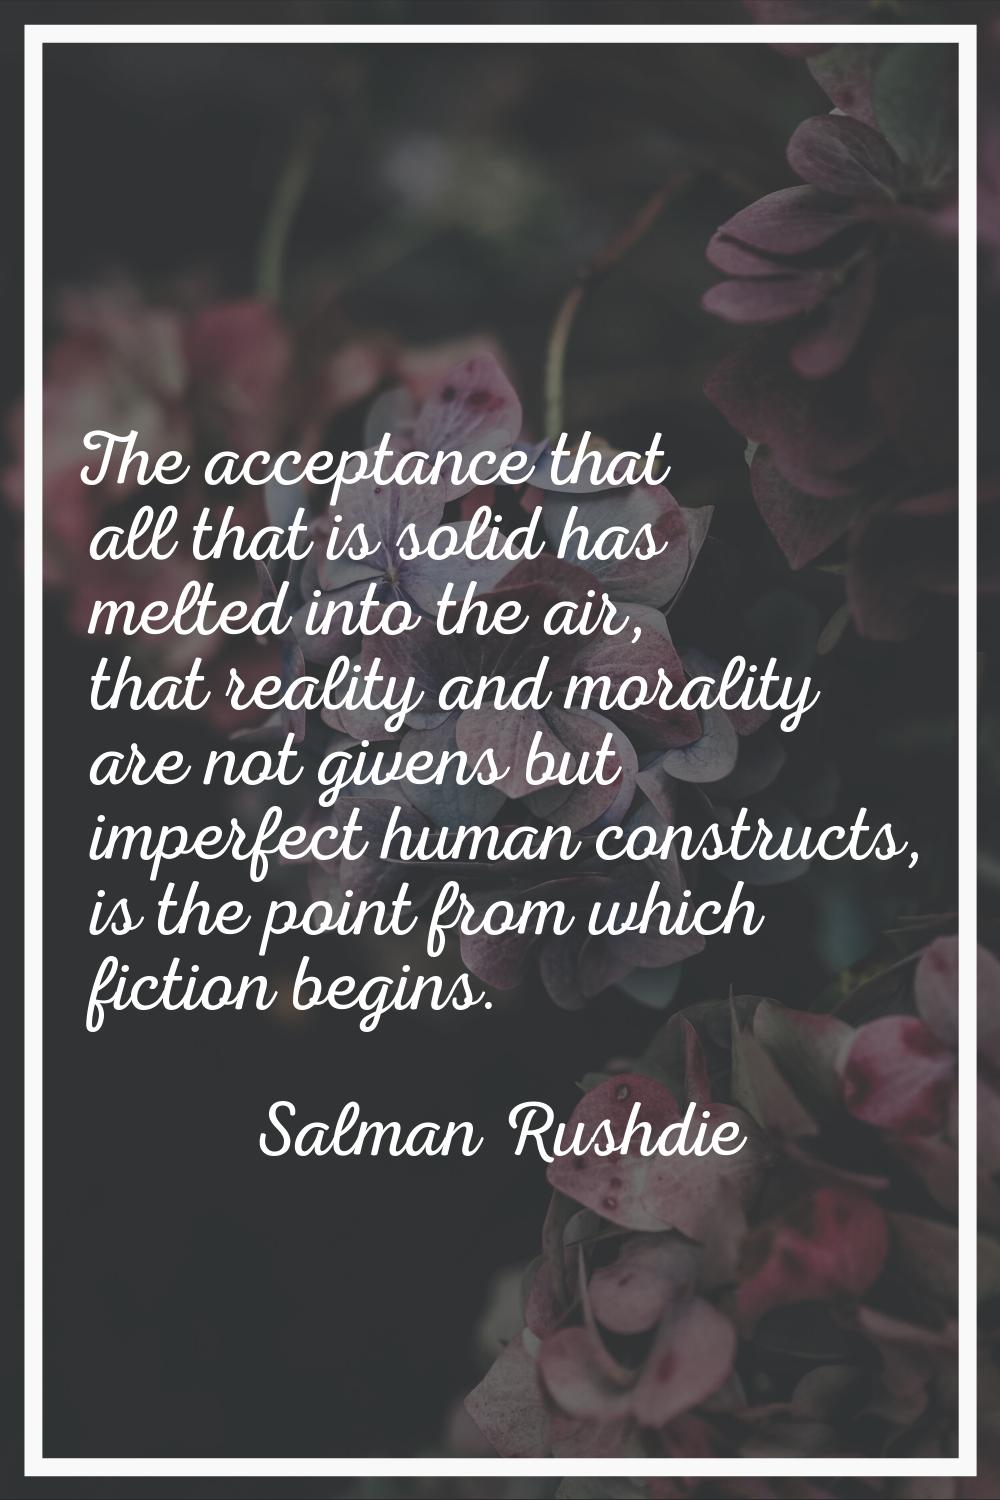 The acceptance that all that is solid has melted into the air, that reality and morality are not gi